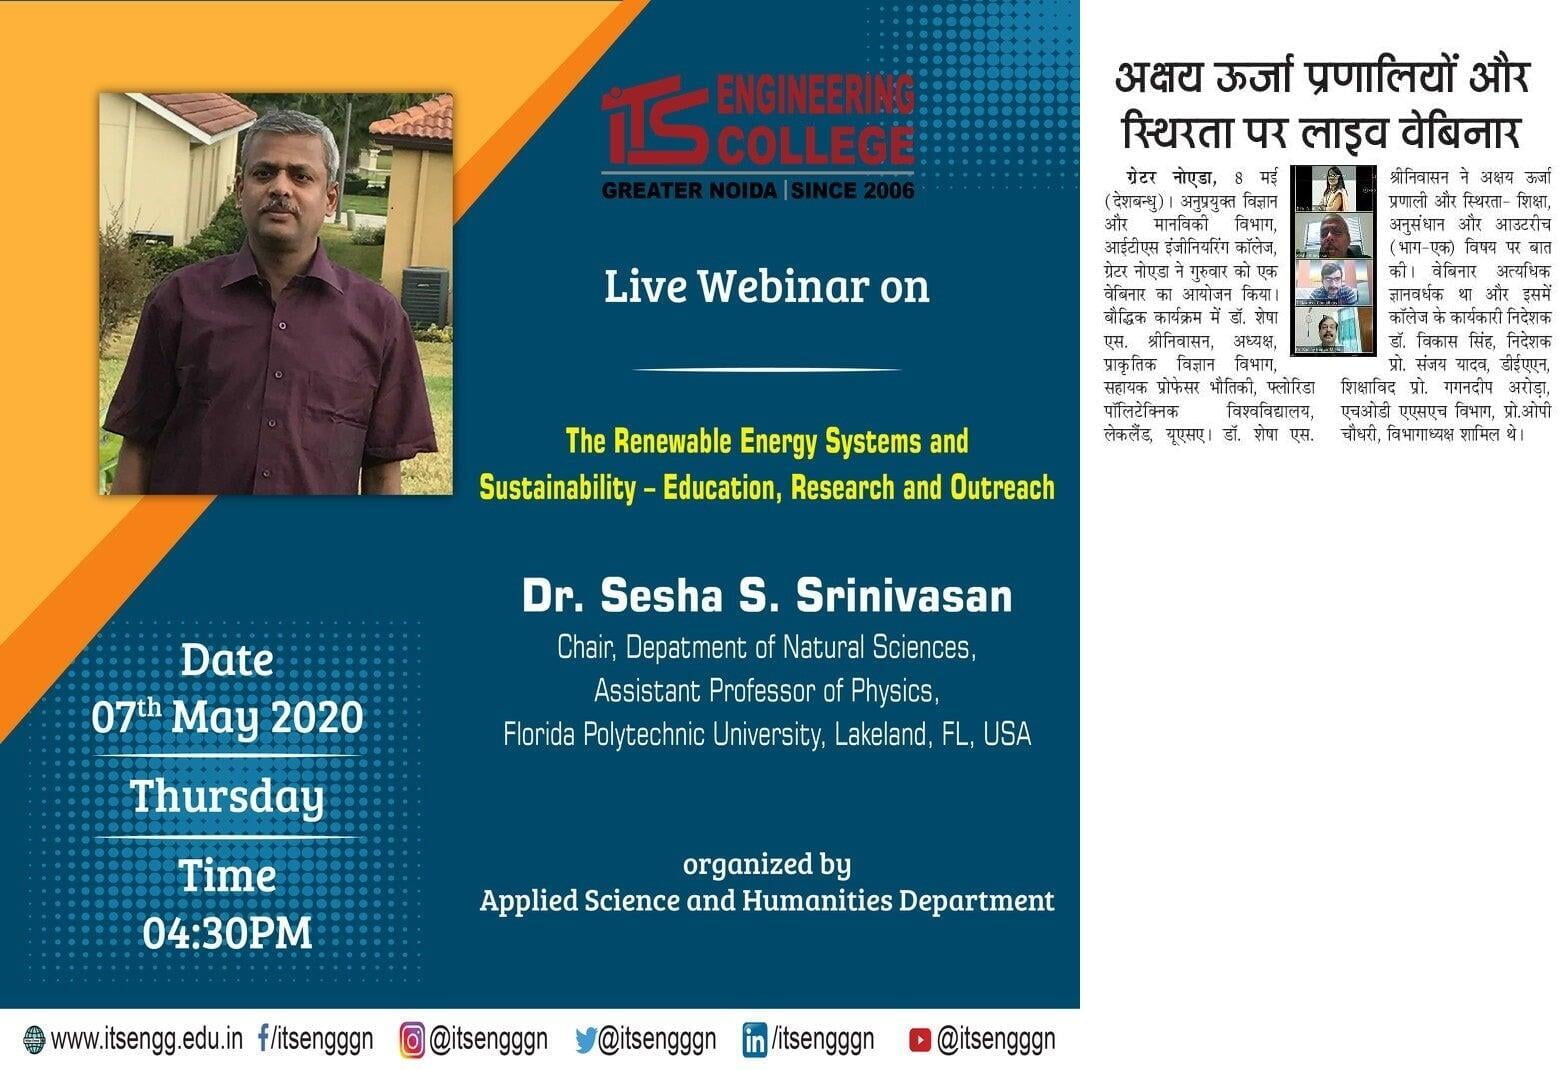 Live Webinar on the Renewable Energy Systems and Sustainability